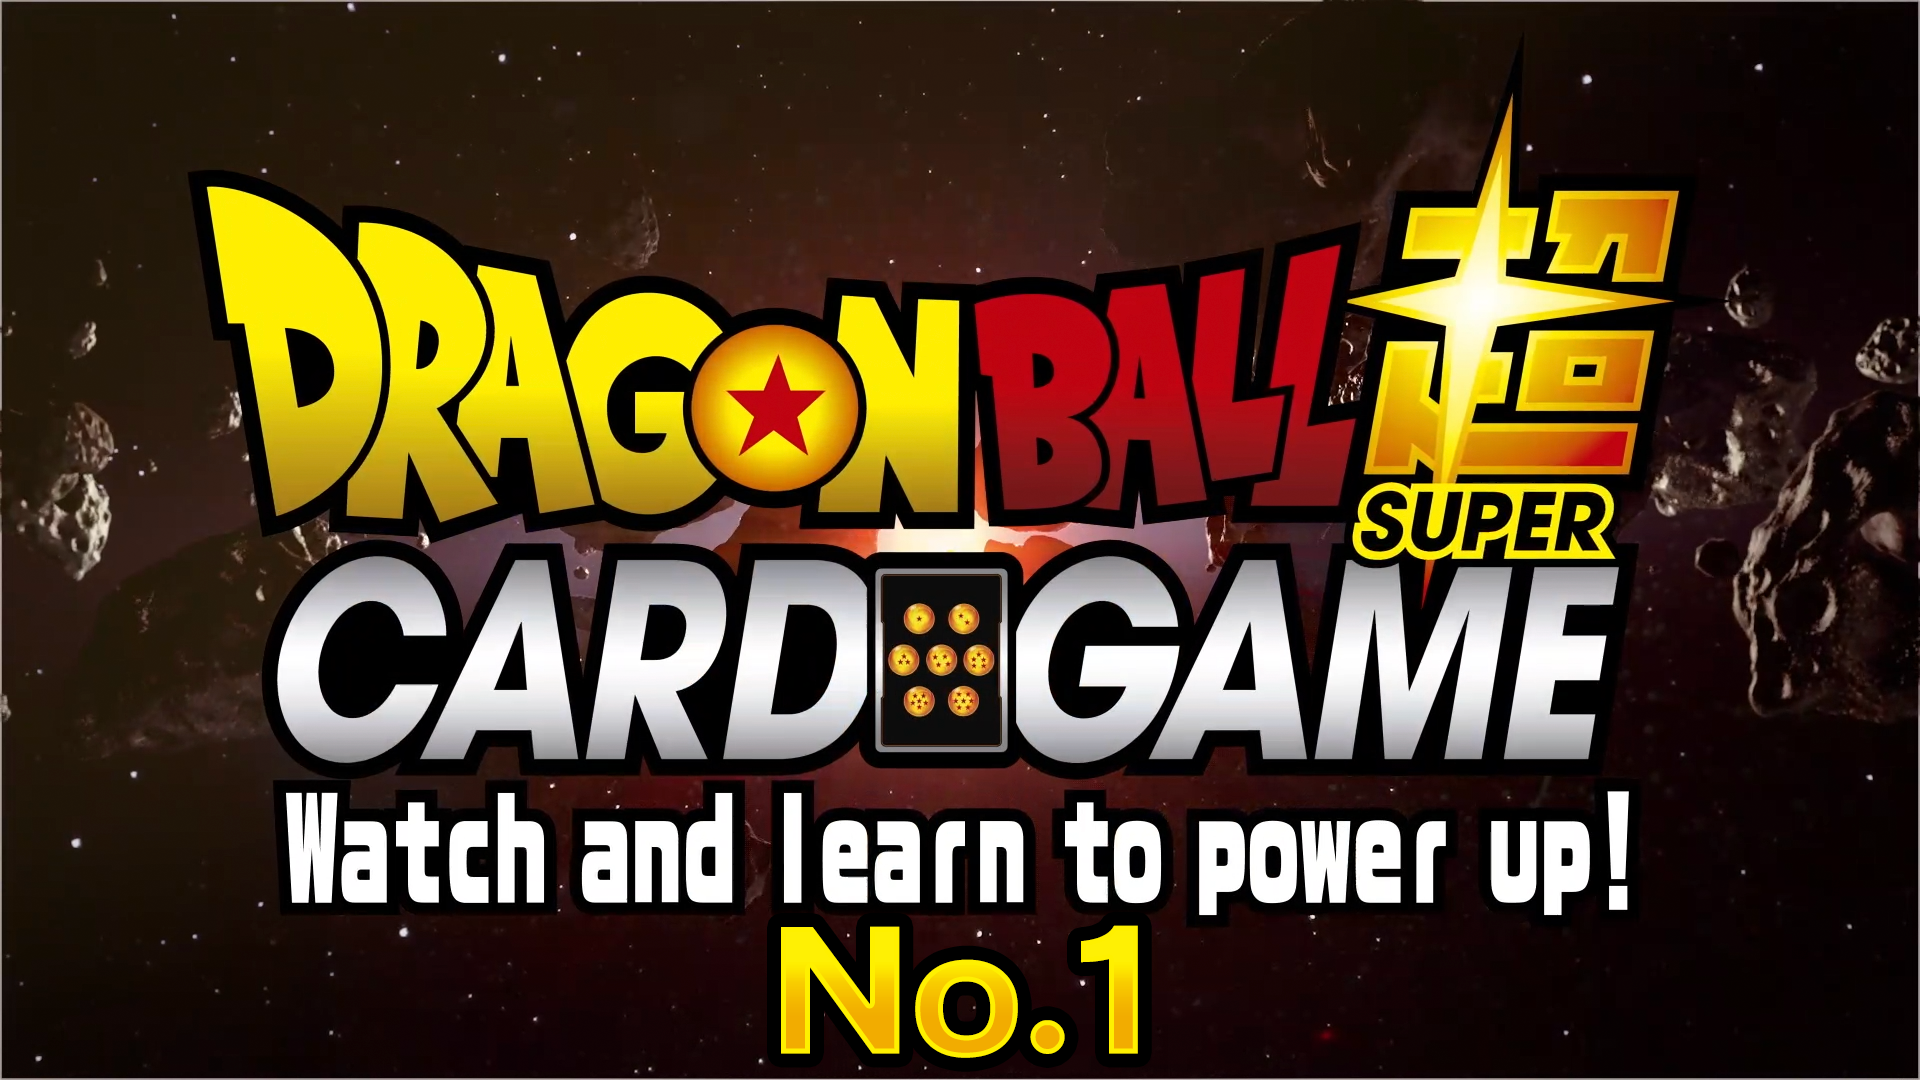 Dragon Ball Super Card Game: Watch and Learn to Power Up! No. 1